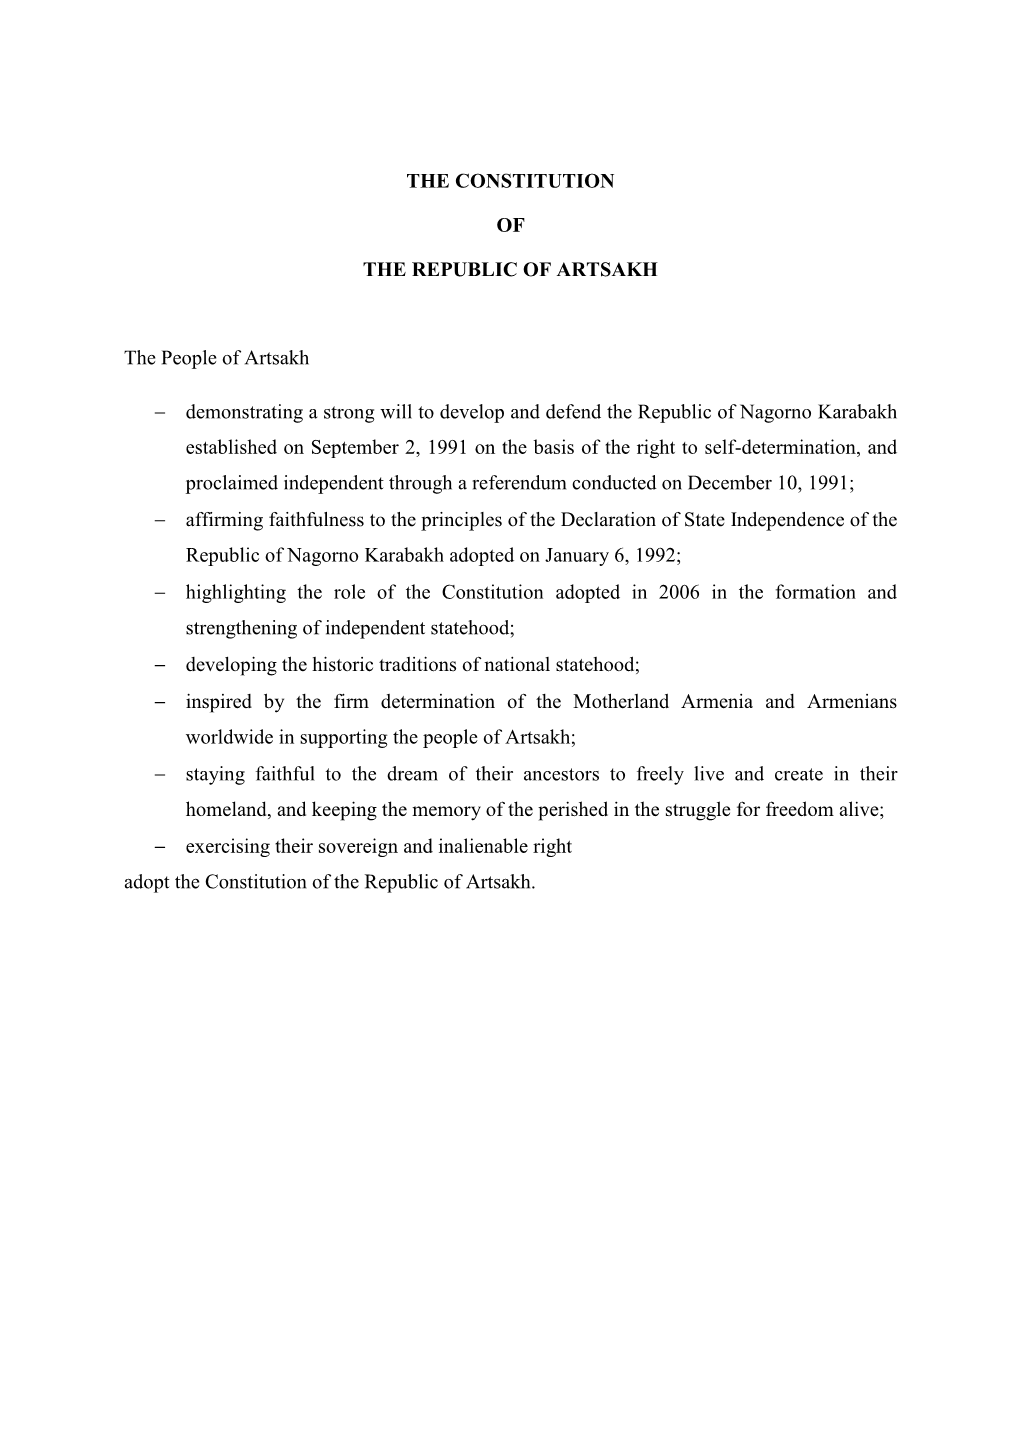 THE CONSTITUTION of the REPUBLIC of ARTSAKH The